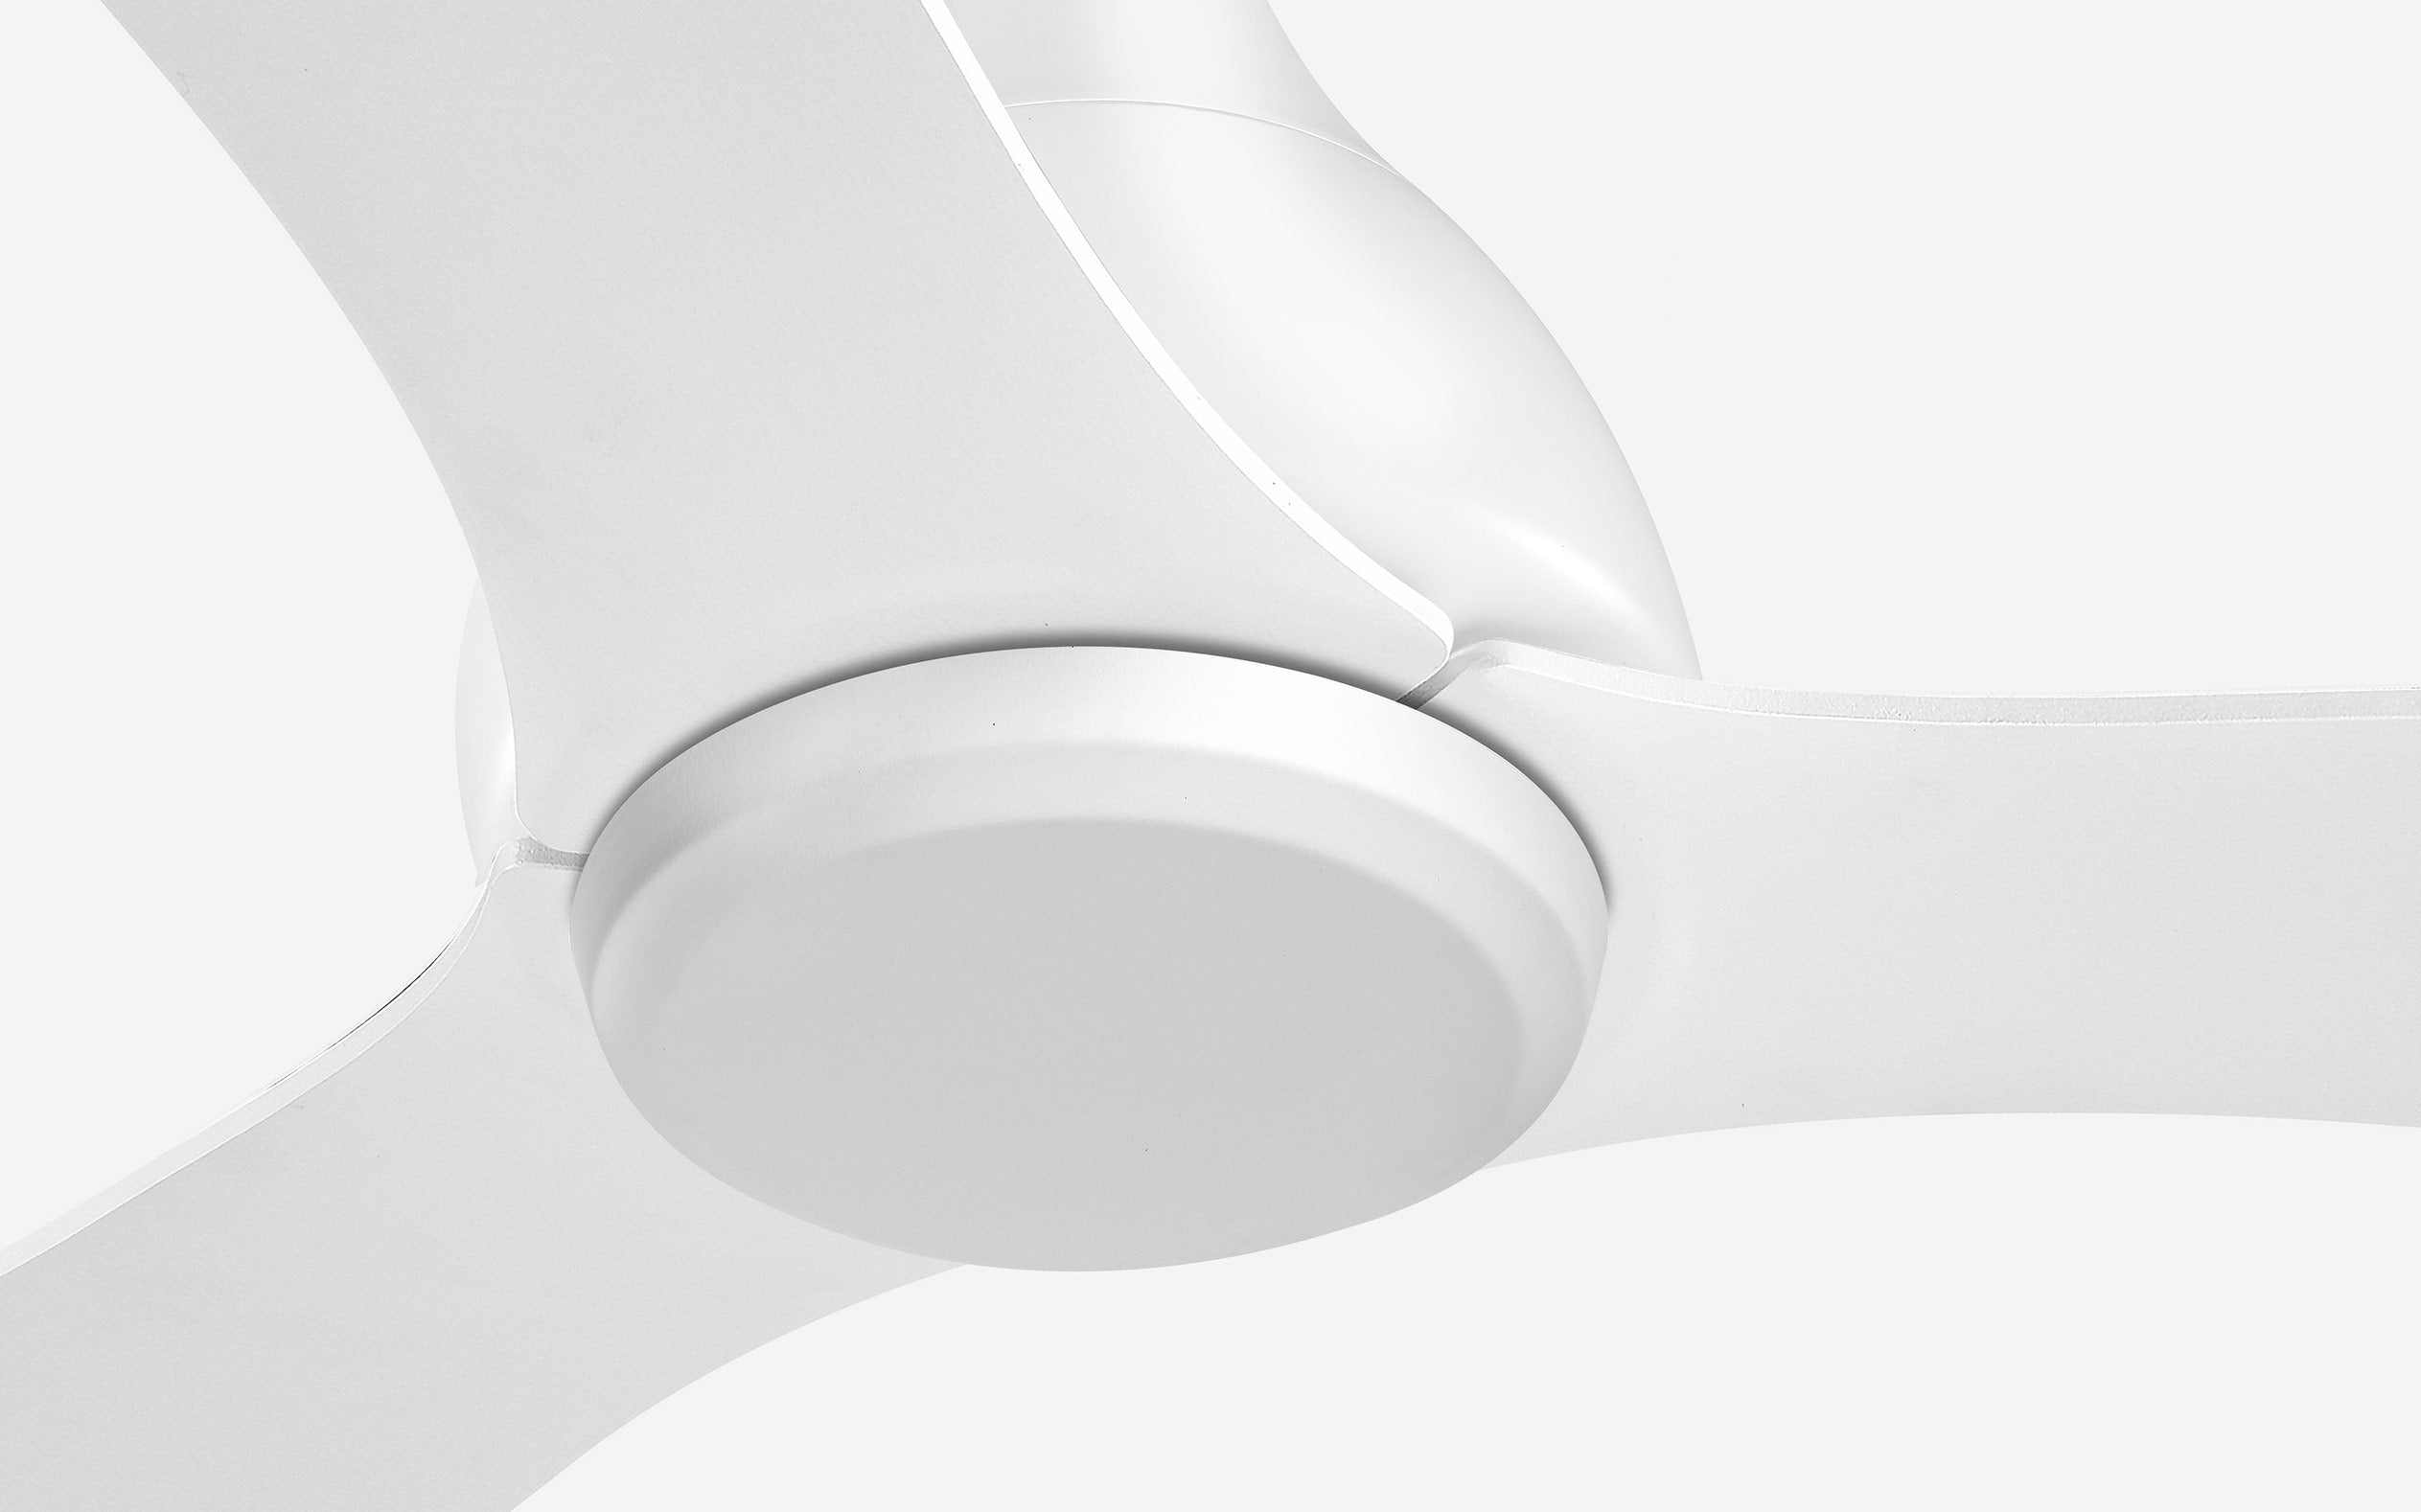 Opal Storm Ceiling Fan - #Body Color_White|Blade Color_White|Blade Size_56"